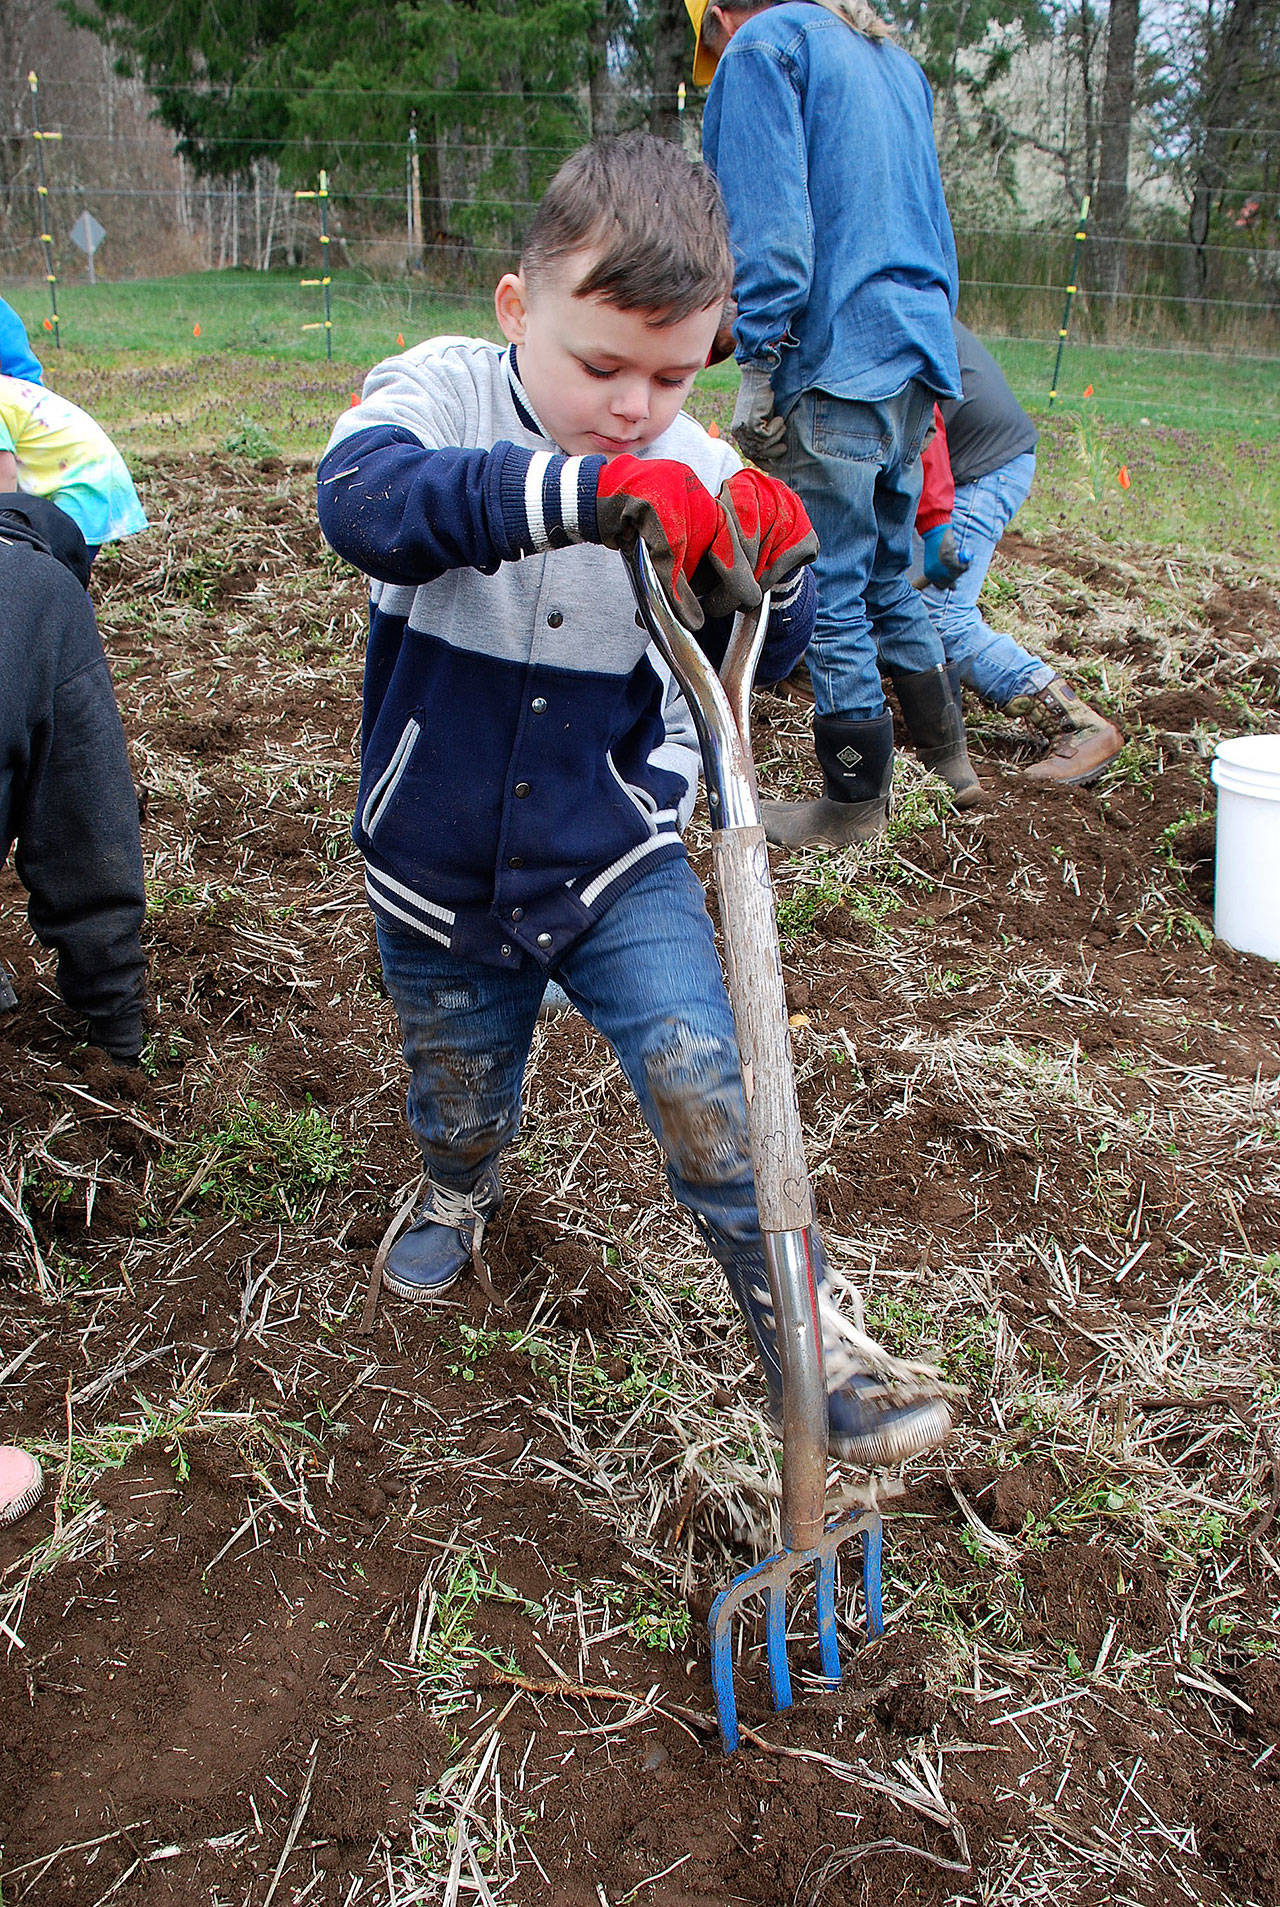 Bubba Garcia, 5, of Port Orchard uses a pitchfork to unearth potatoes for harvesting. He was helped by brother Keone Garcia, 9, Autumn Garcia, 6, and Lilly Verbic, 6 (not in photo). (Bob Smith | Kitsap Daily News)